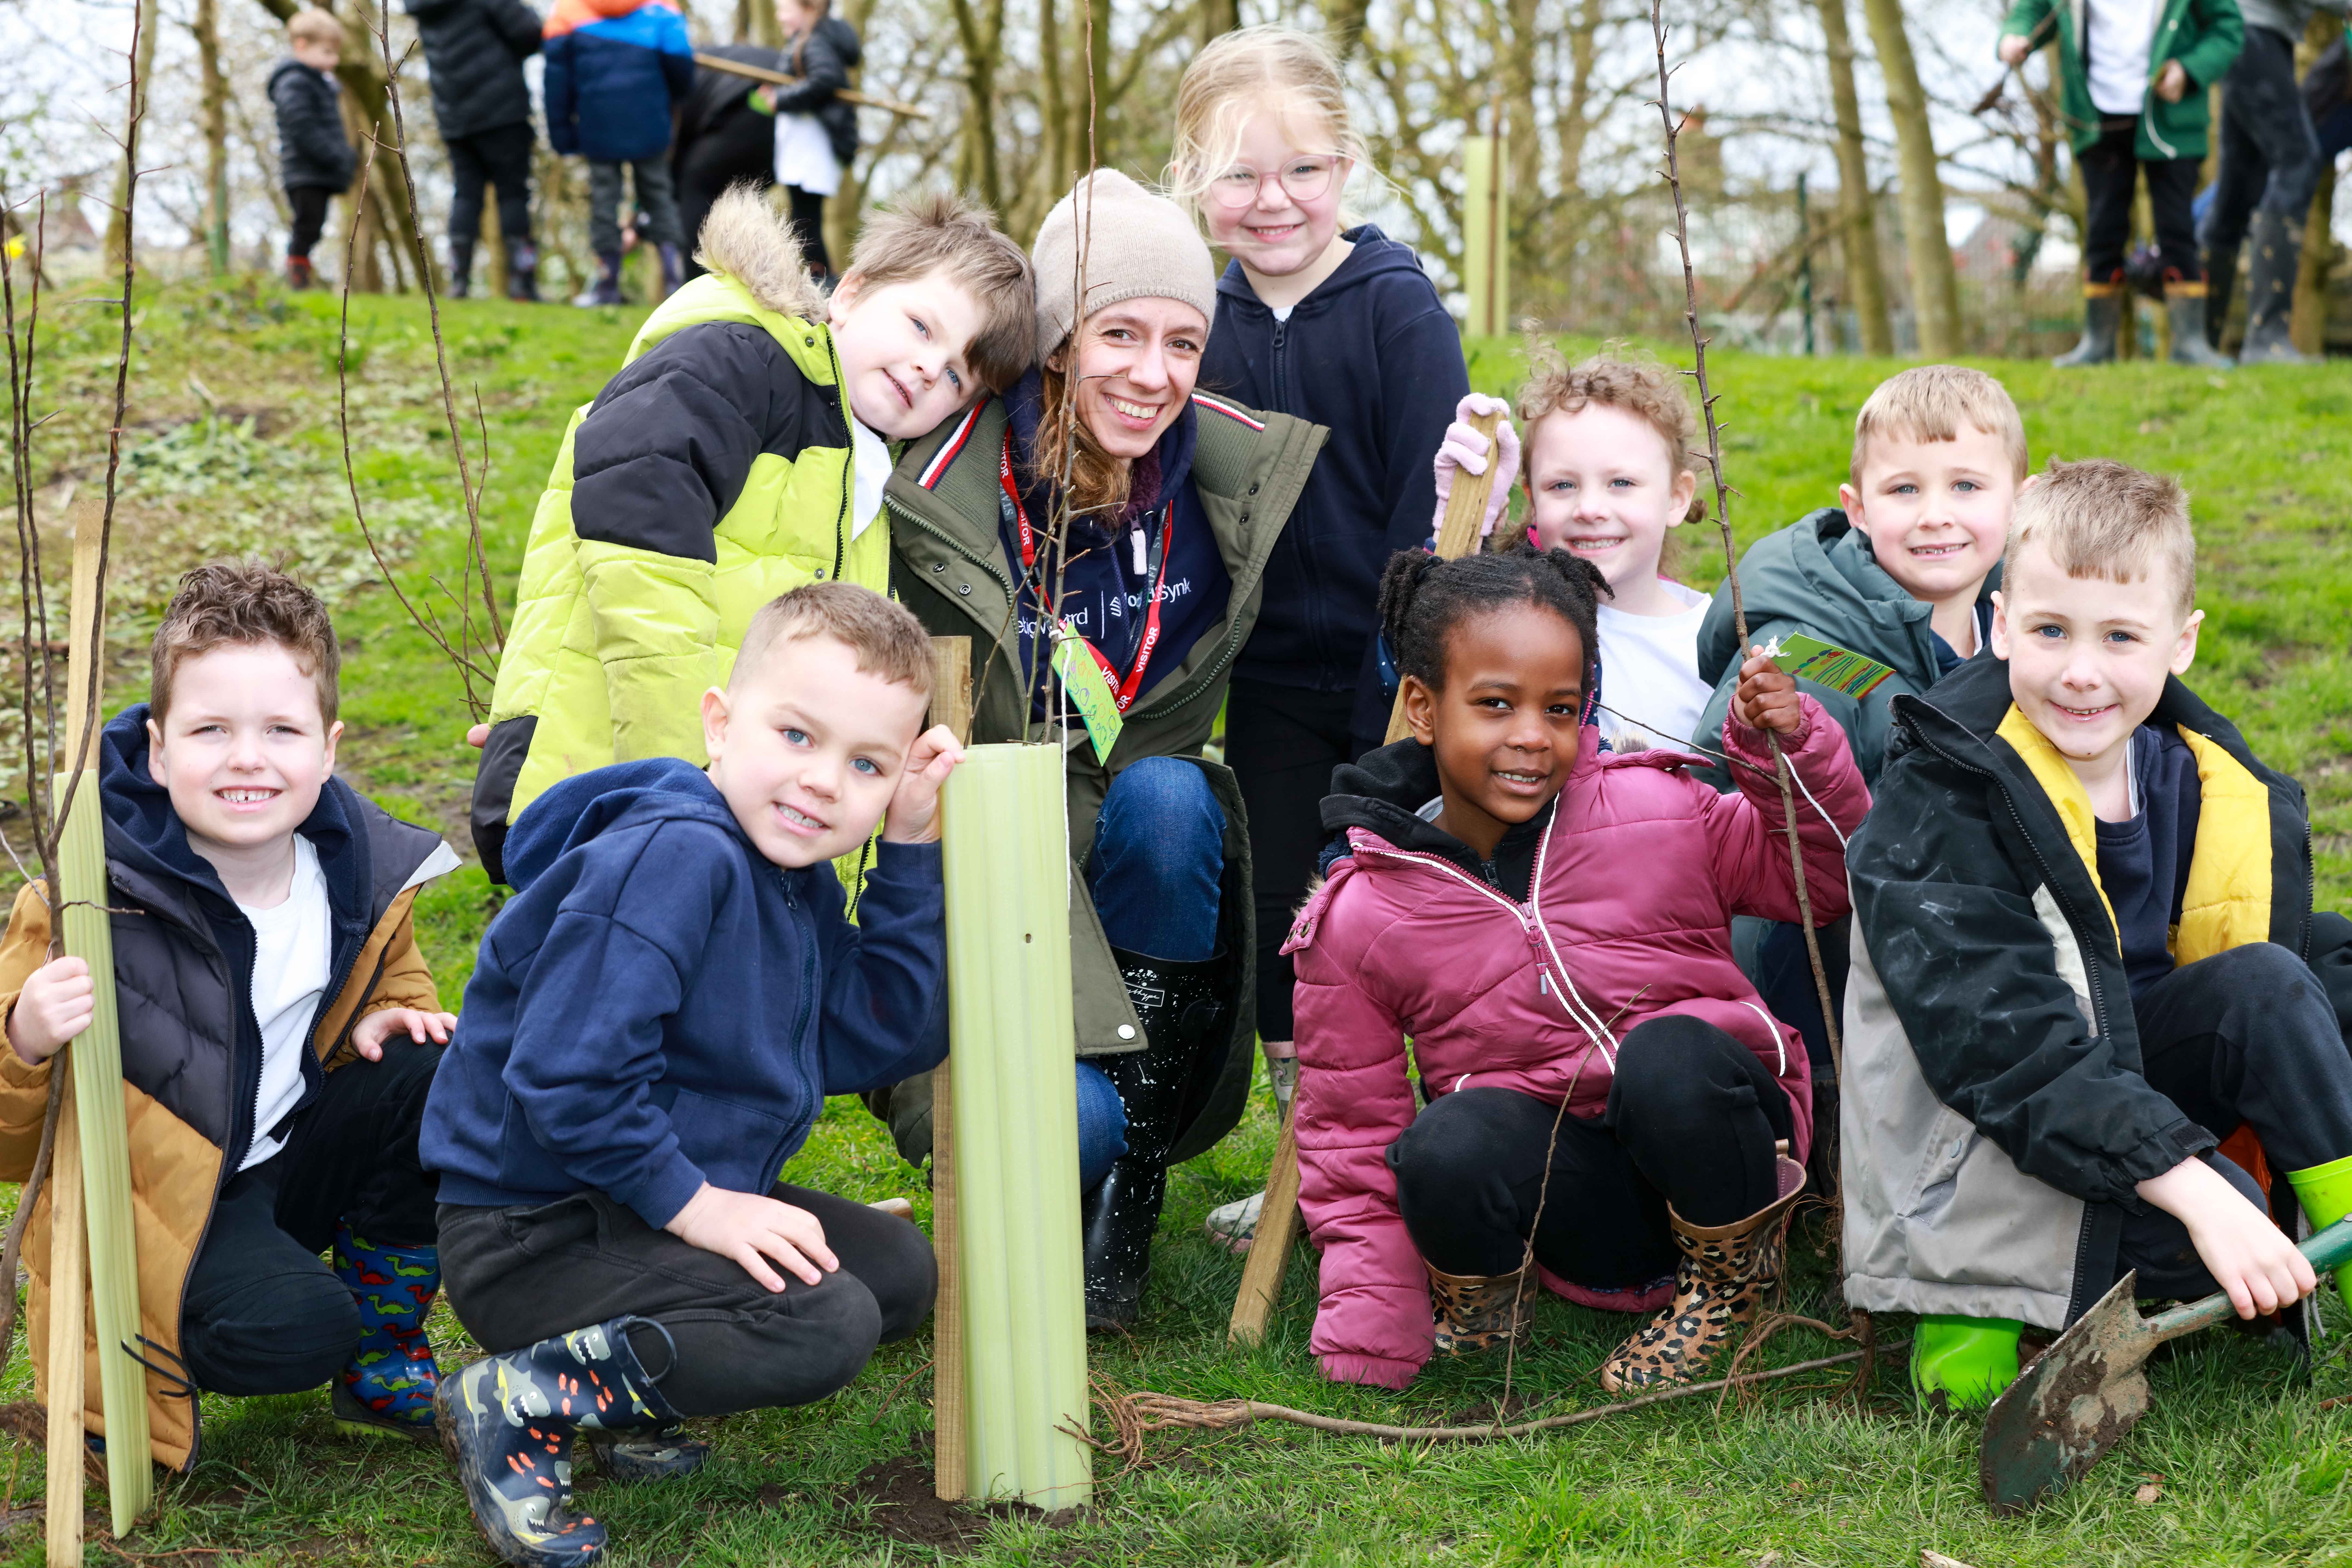 thebigword planting at East Ardley Primary Academy